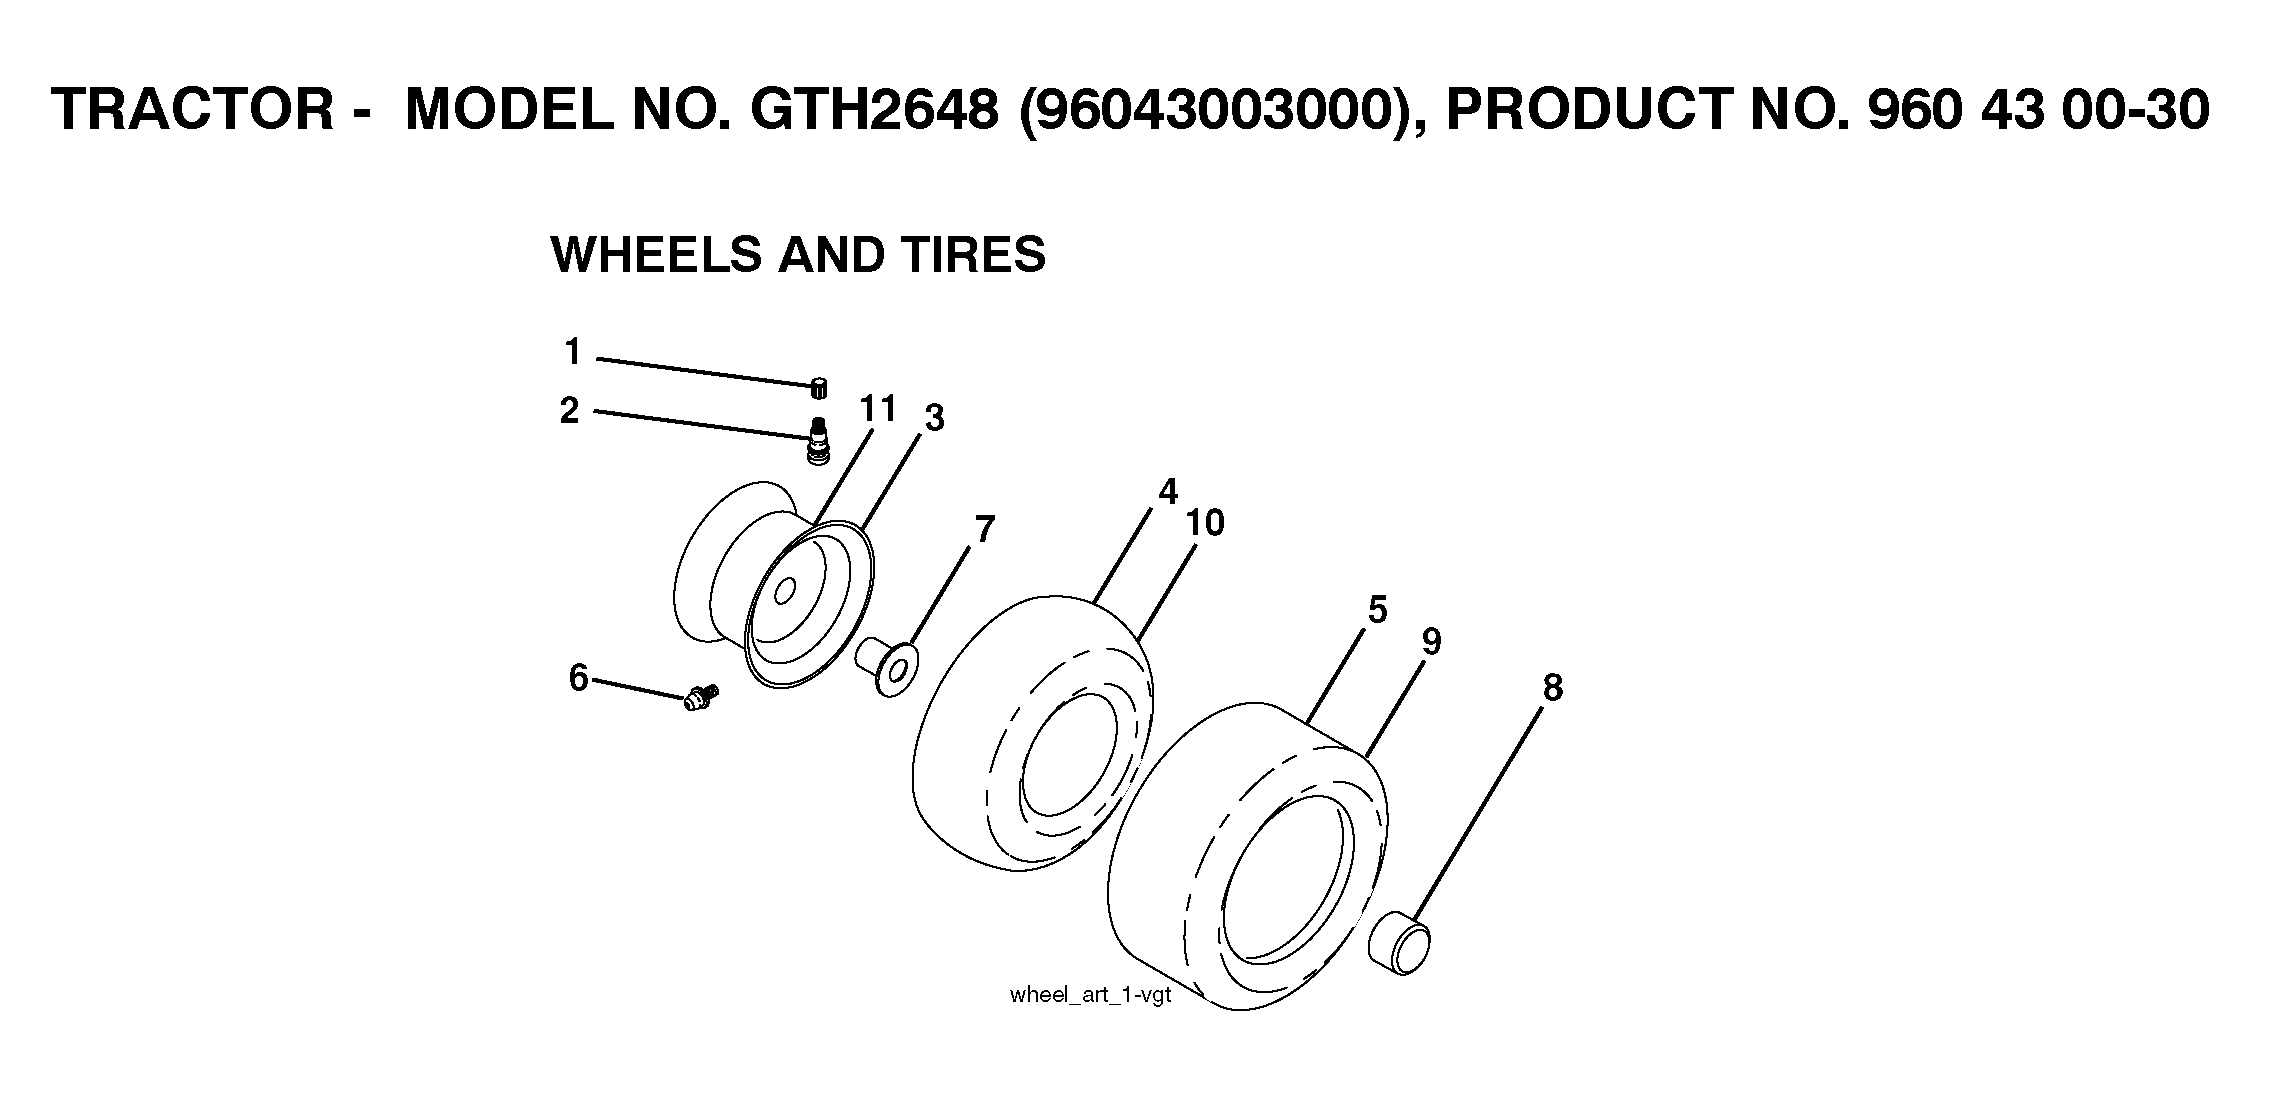 Wheels and tires 532059192, 532065139, 532148736, 532059904, 532106230, 532000278, 532009040, 532104757, 532105588, 532007152, 532106277, 576707201